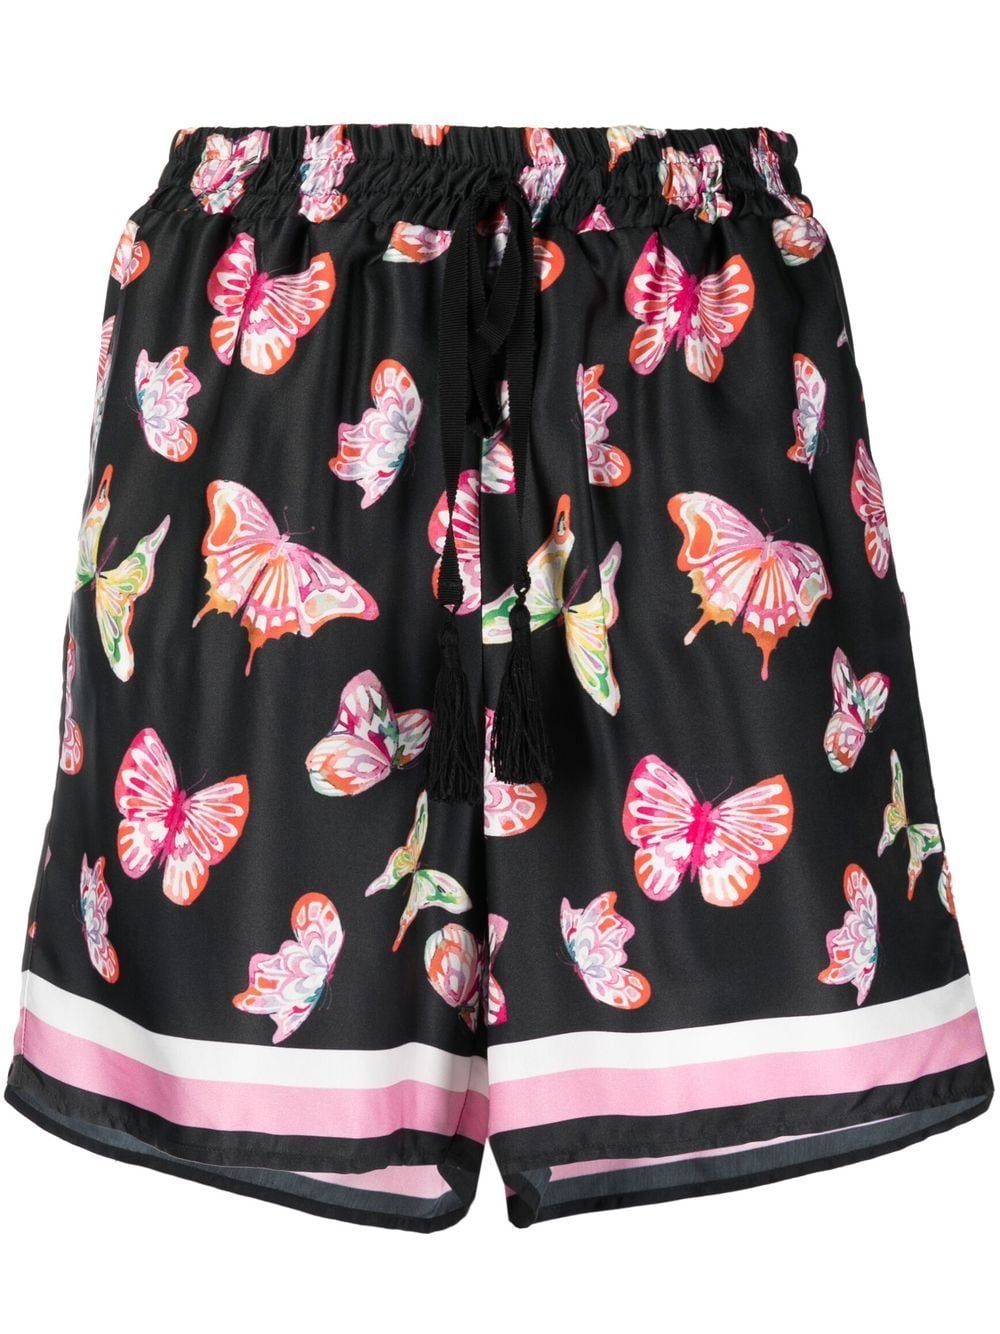 butterfly-print shorts